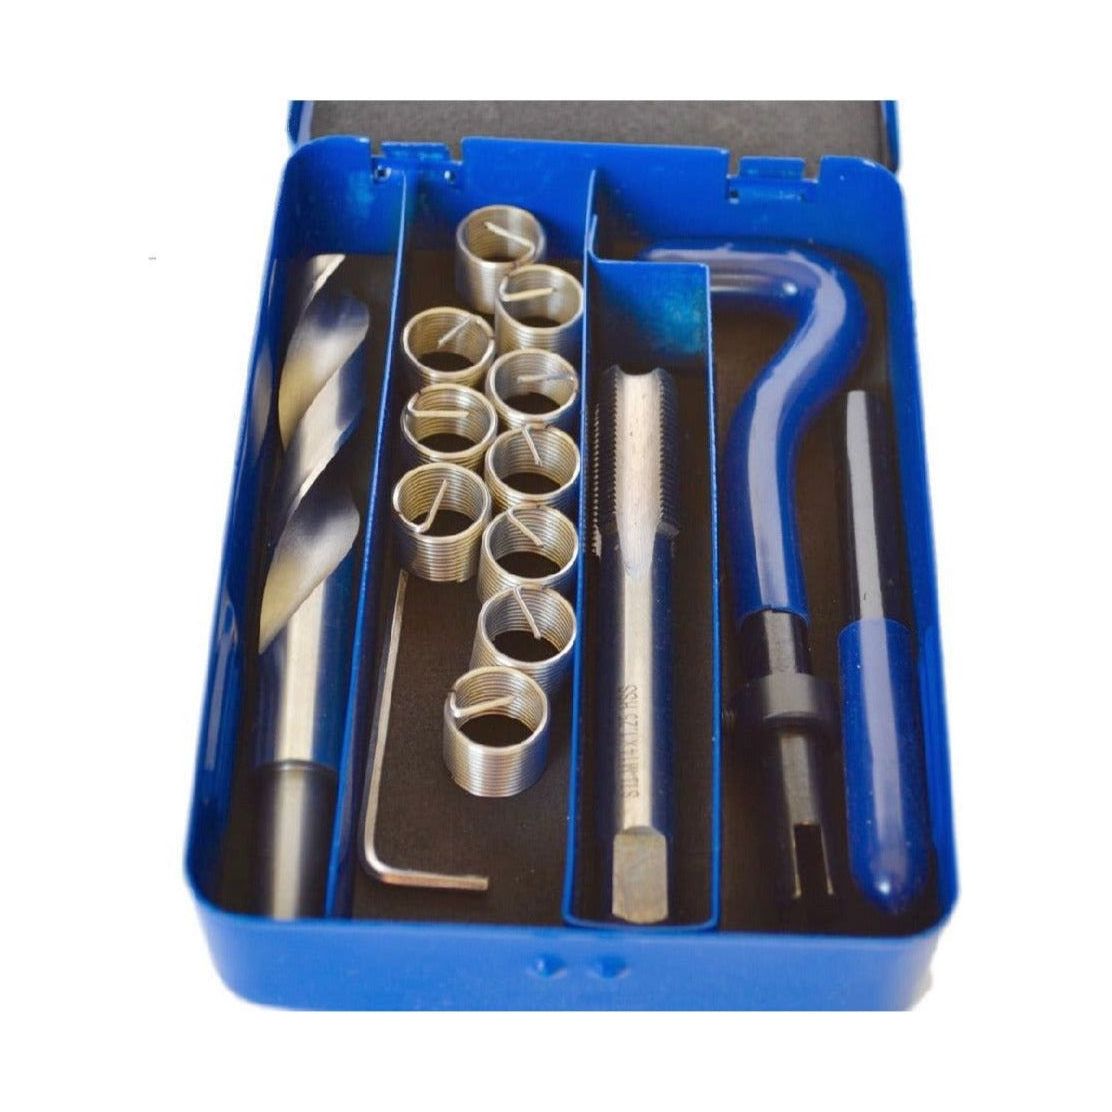 Helicoil Kit 1/2 - 13 Thread Repair Insert Tap Set Imperial Helical Powercoil